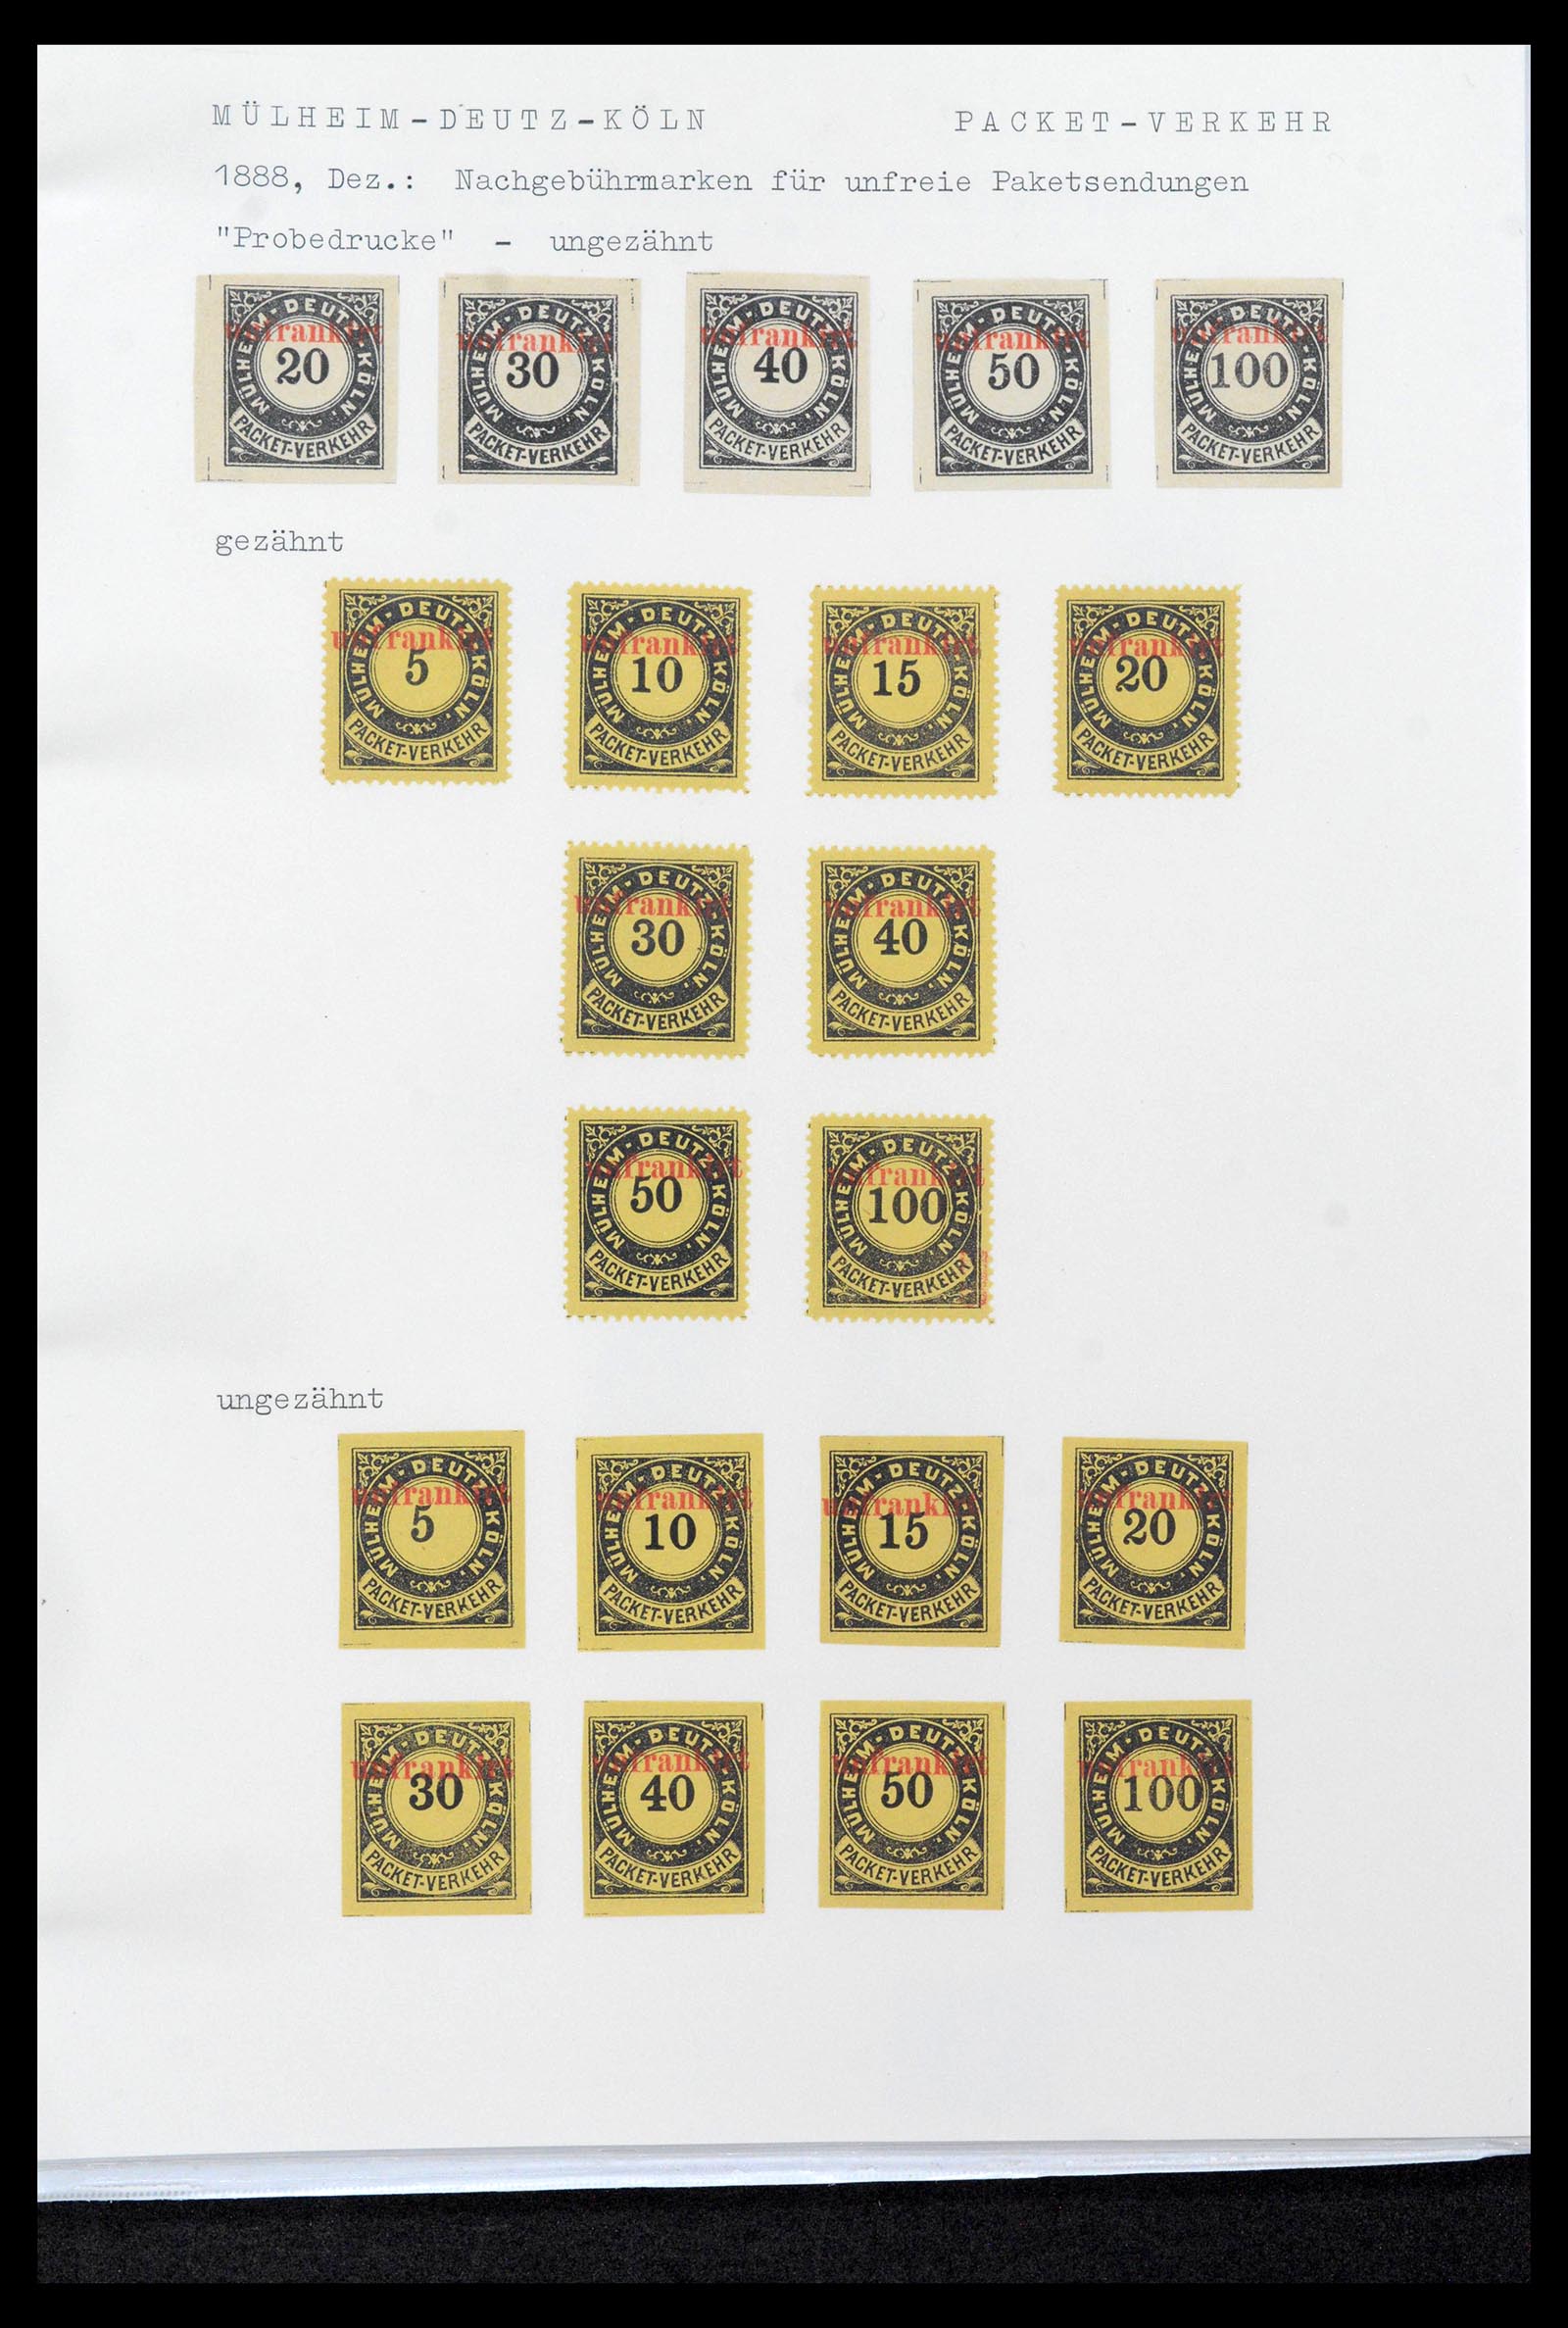 39369 0036 - Stamp collection 39369 Germany citypost 1886-1899.